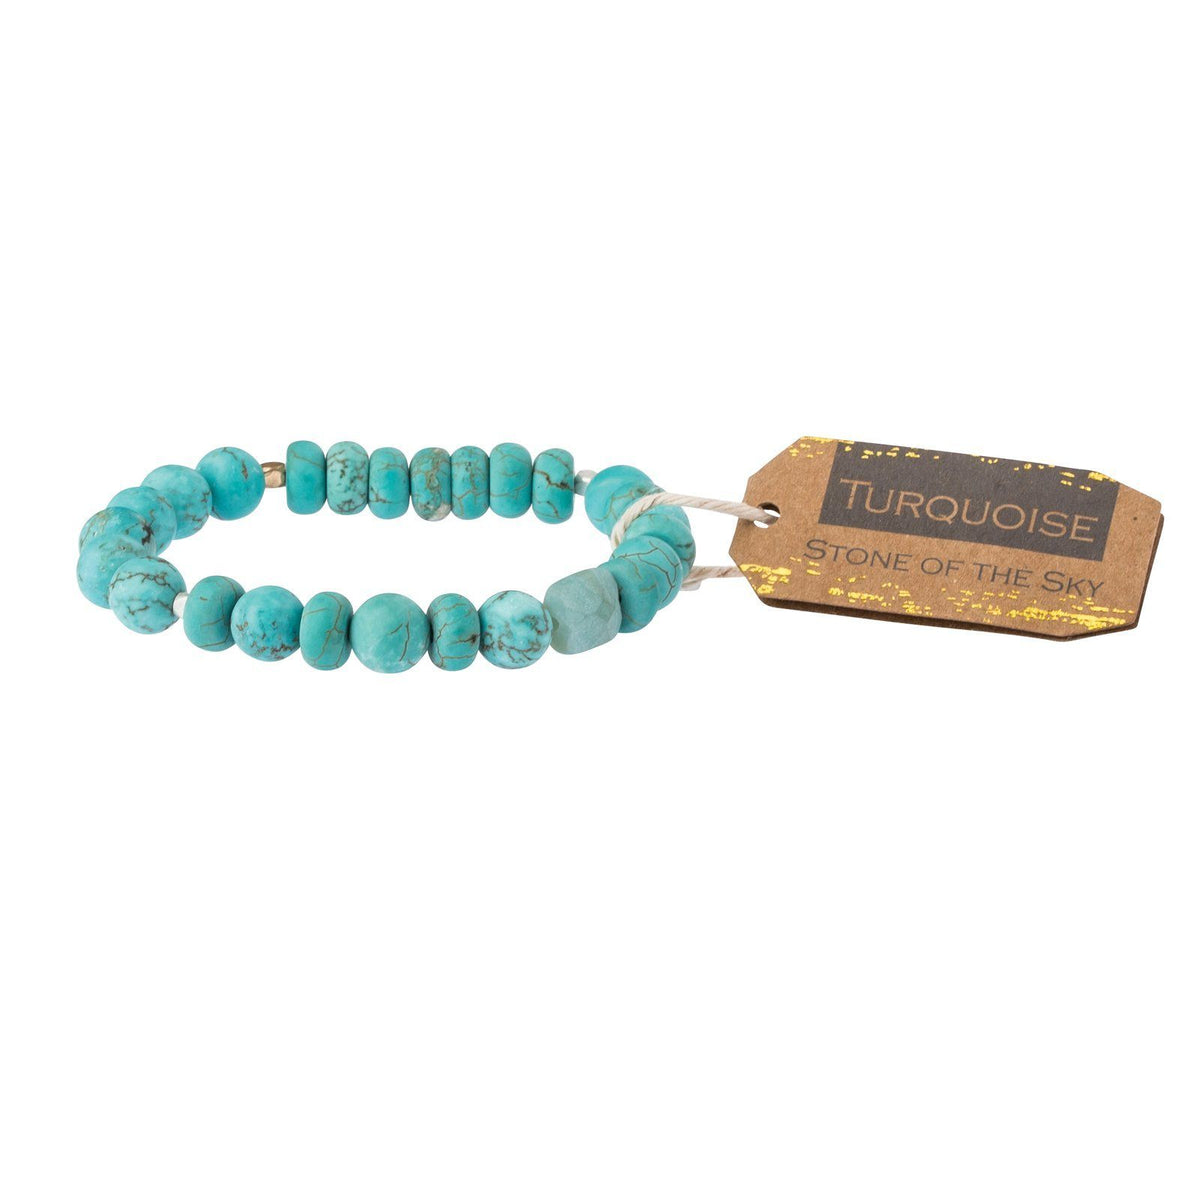 Scout Curated Wears Turquoise Stone Bracelet - Stone of the Sky (1733259264043)